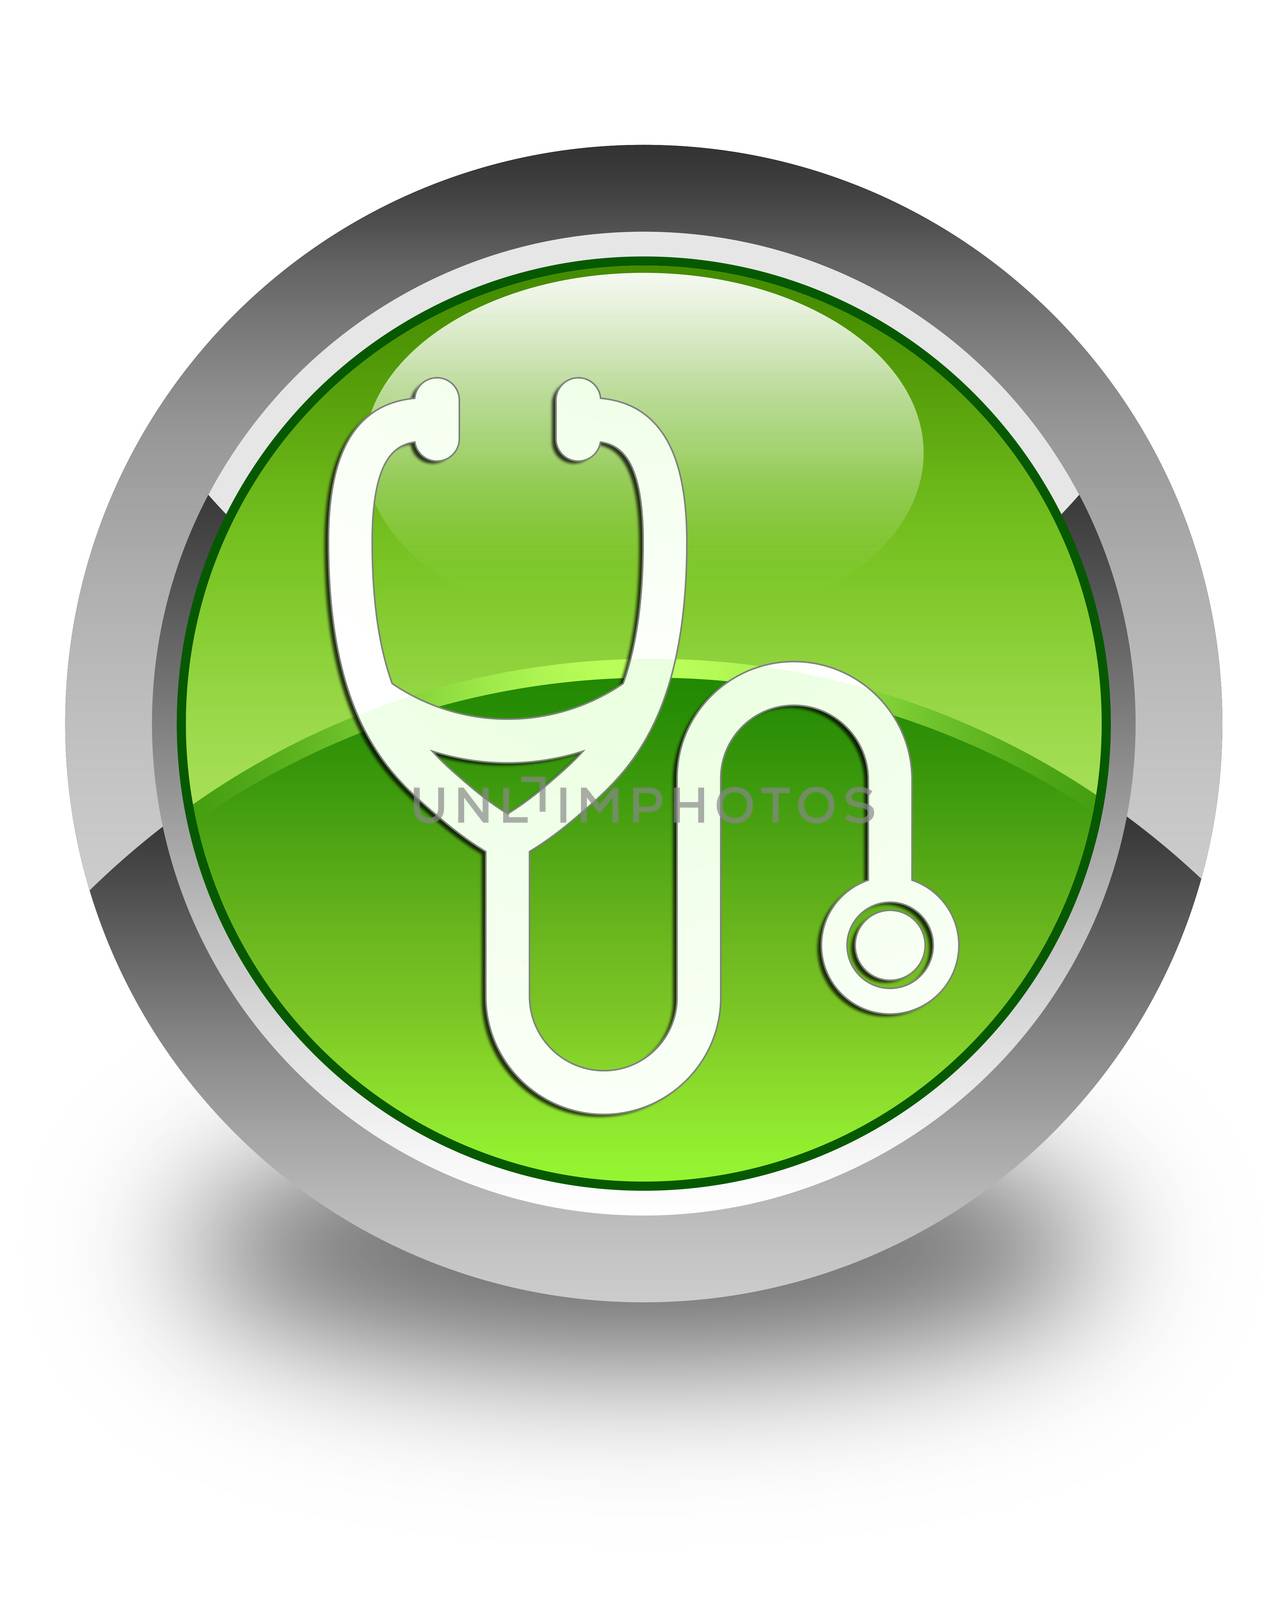 Stethoscope icon on glossy green round button